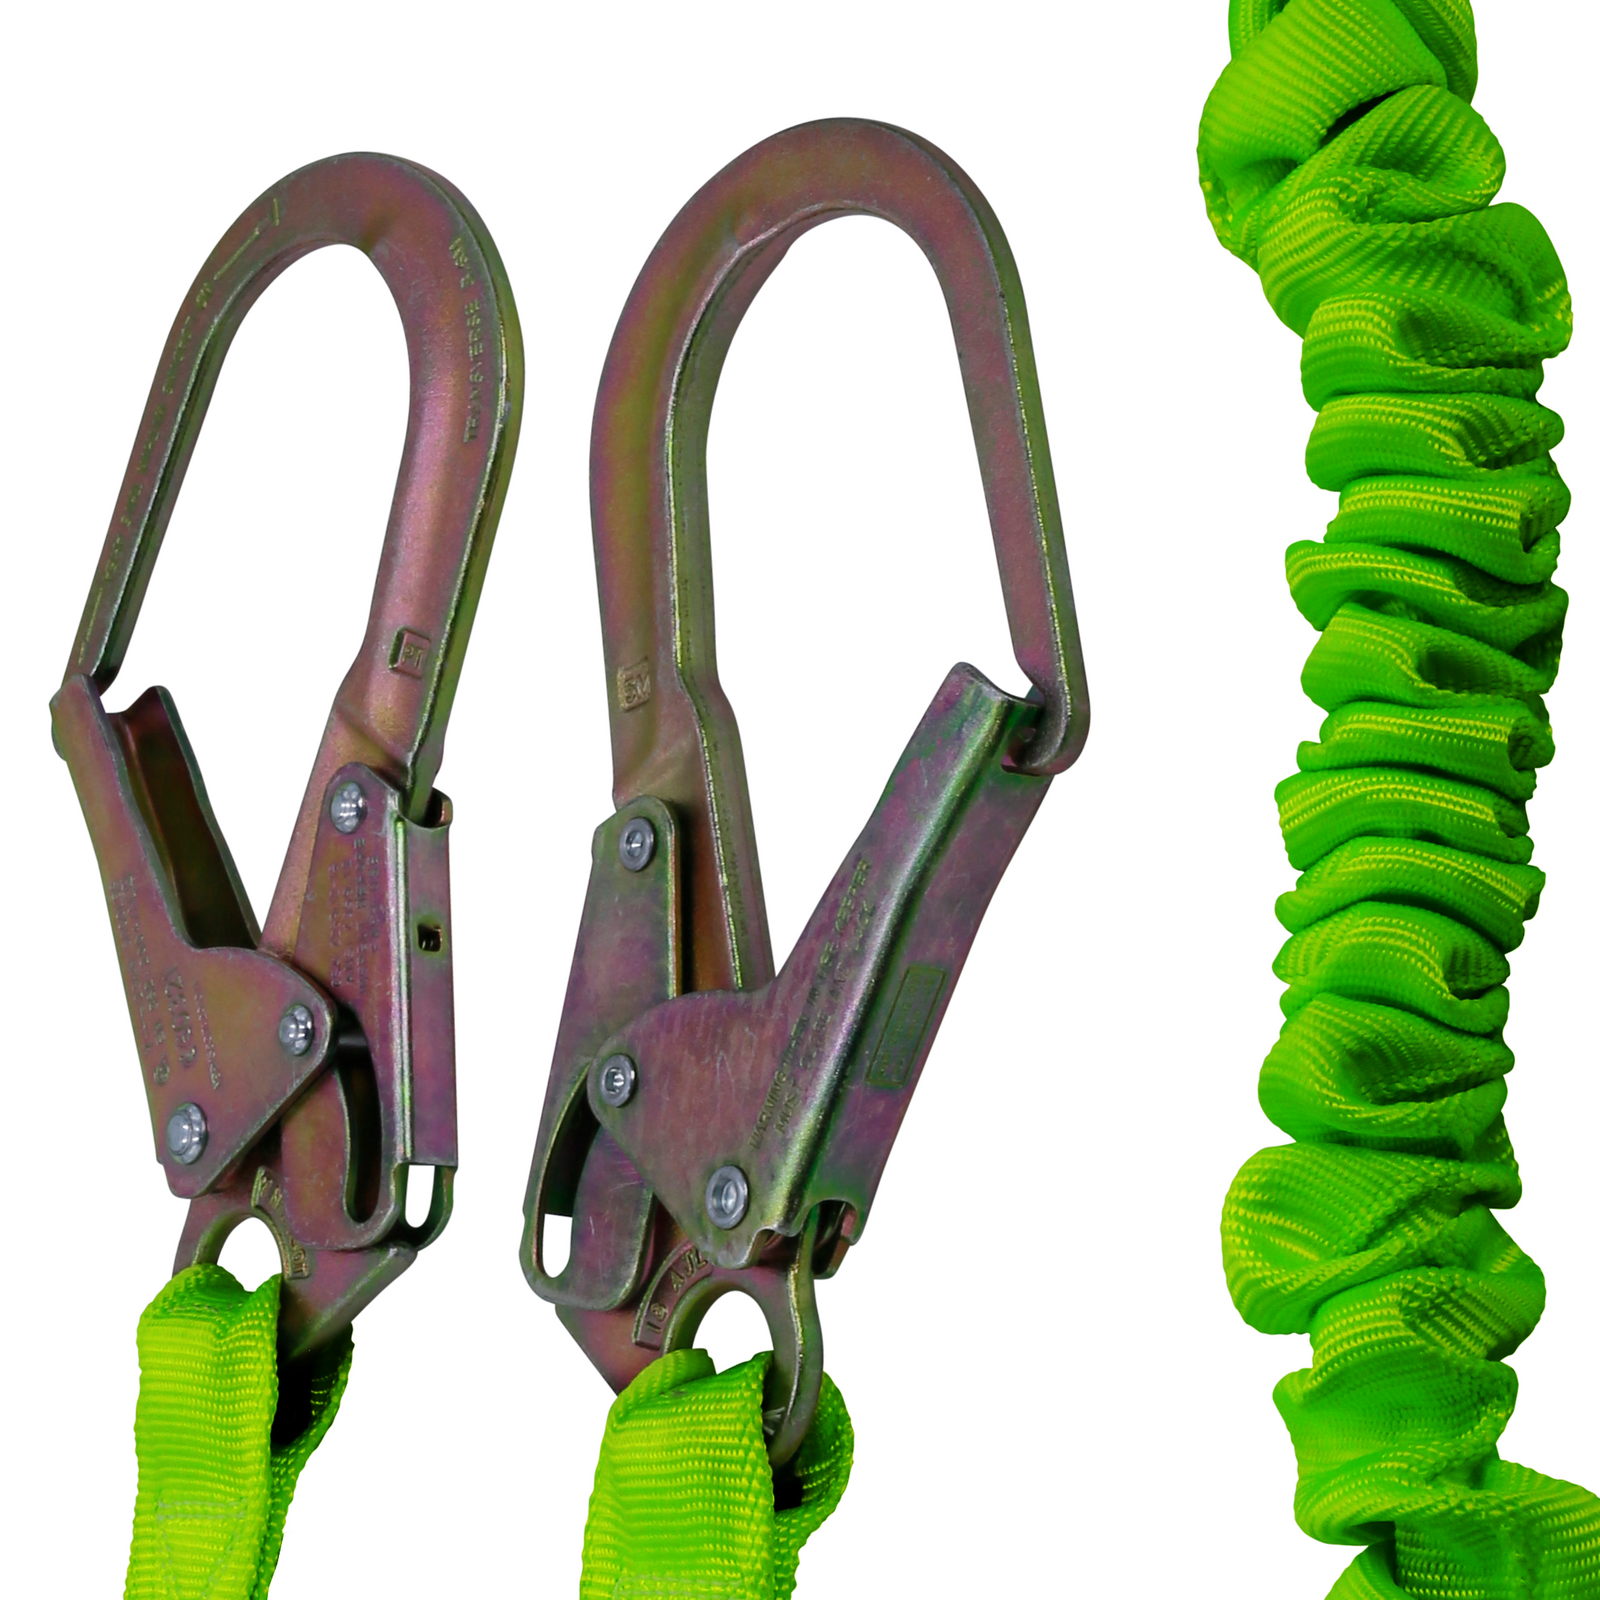 Close up of the 2 metal snap hooks that are part of the twin leg internal shock absorbing lanyard